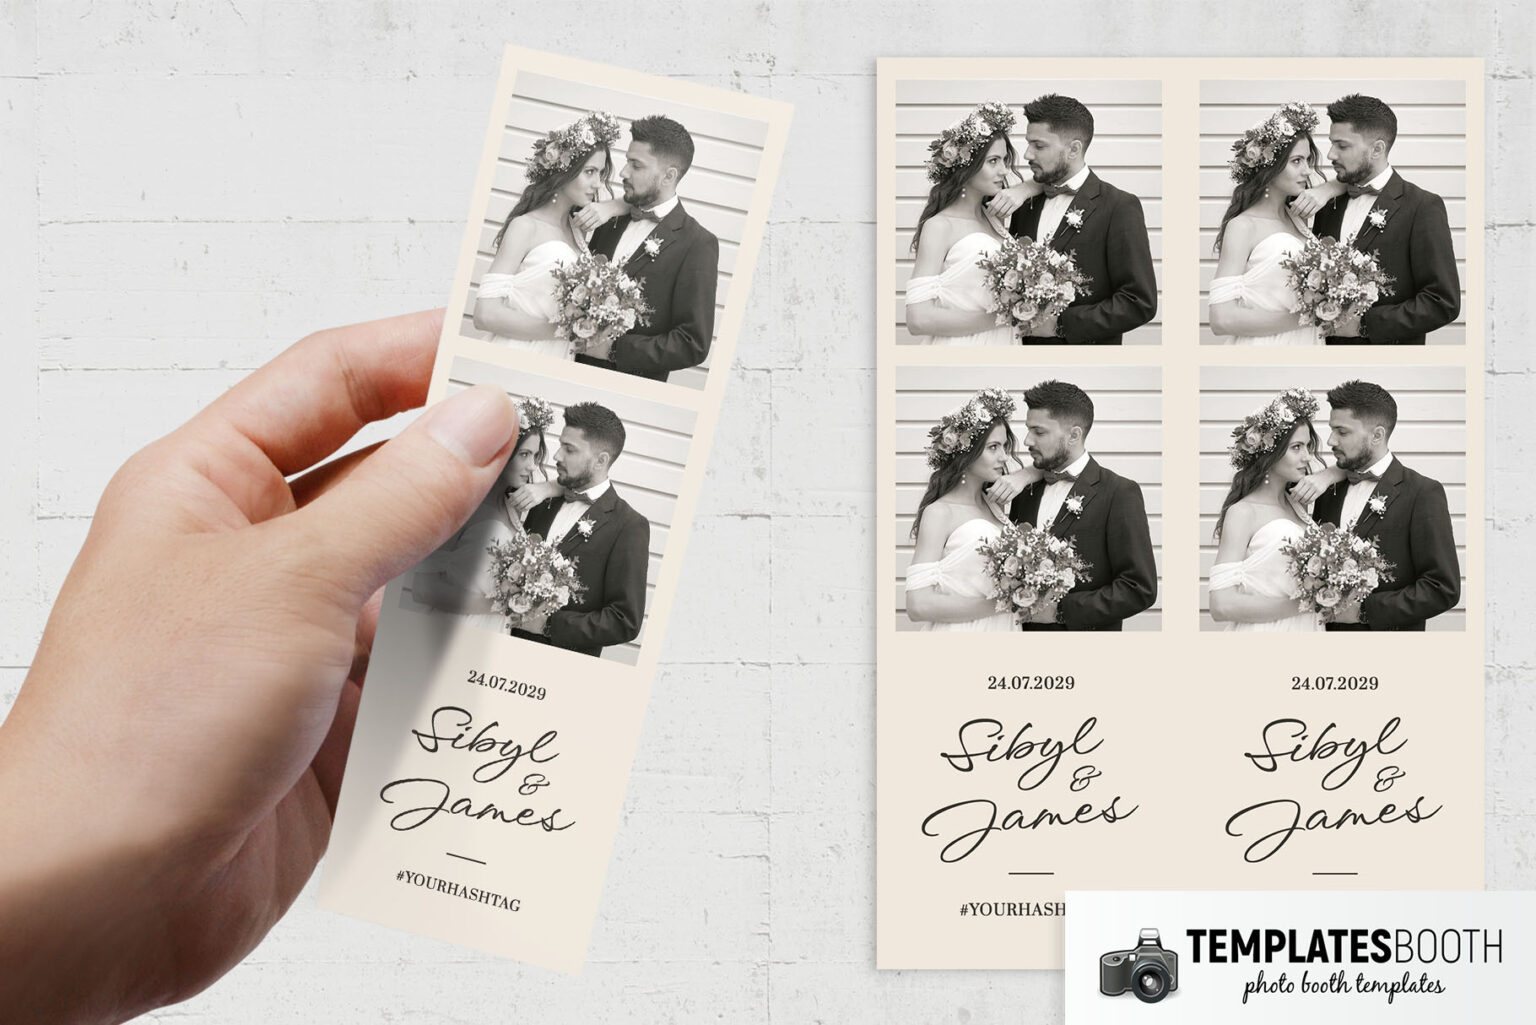 Champagne Wedding Photo Booth Template - TemplatesBooth